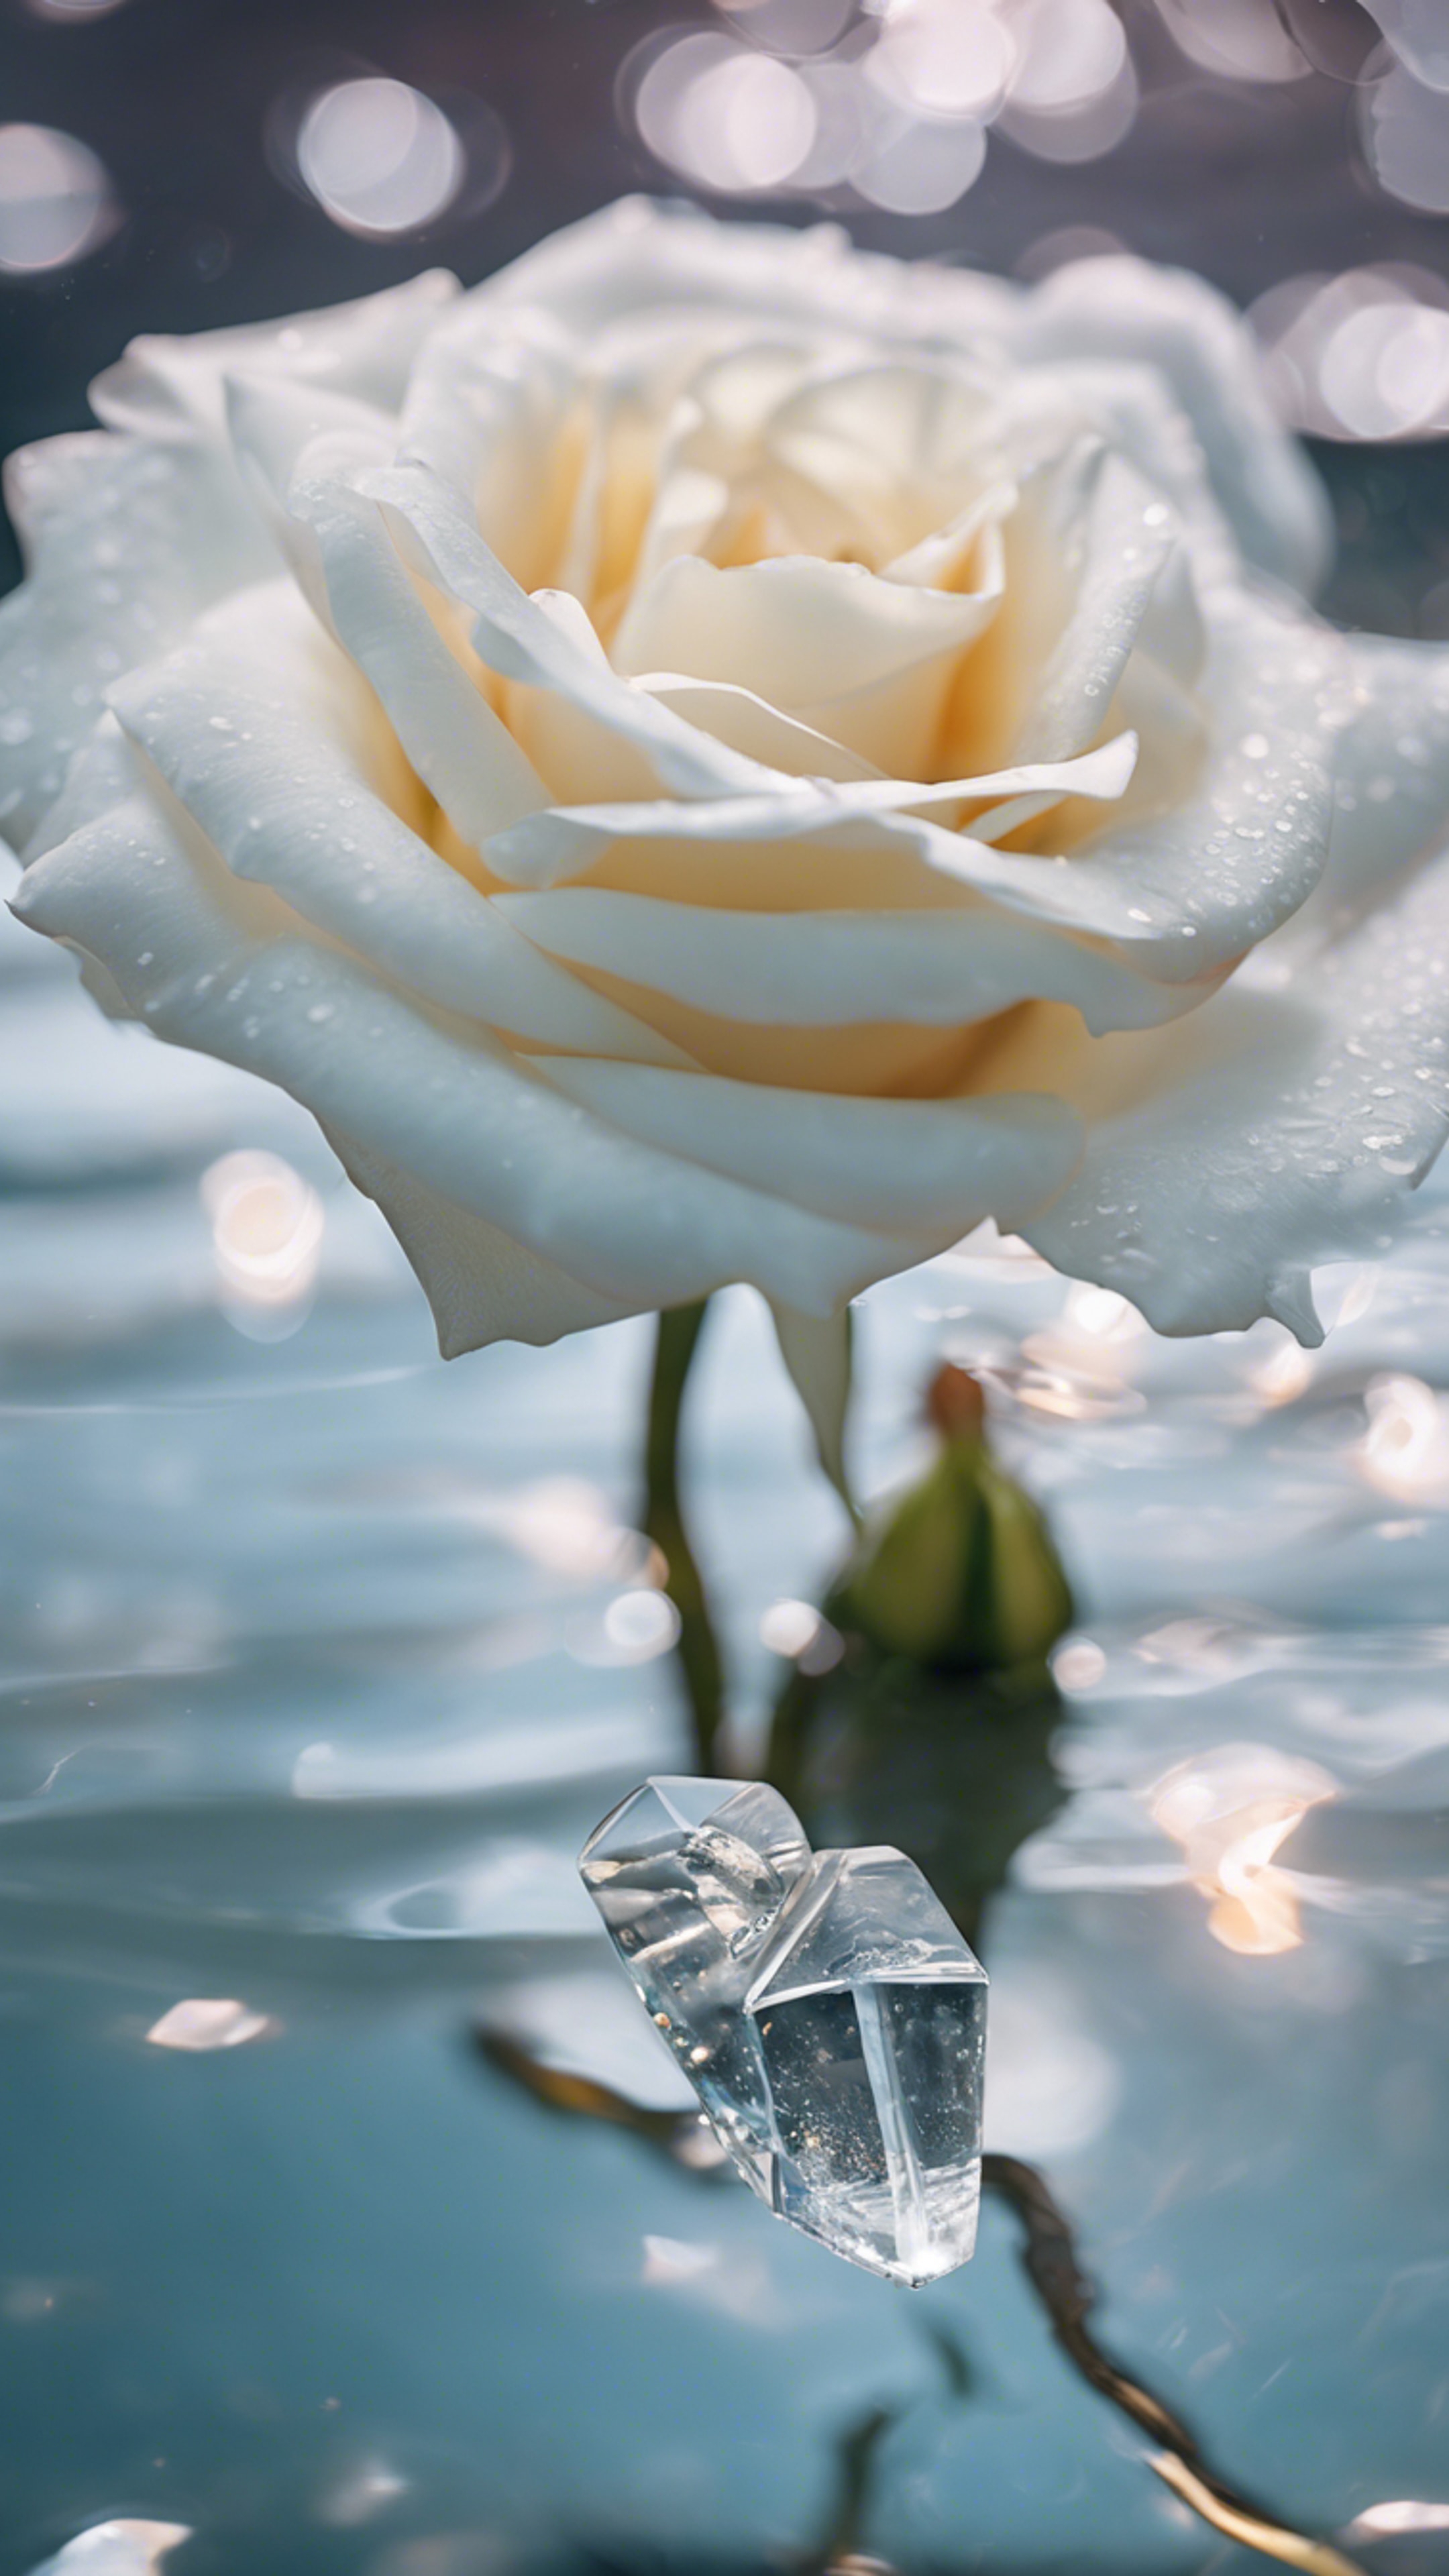 A white rose submerged in clear crystal water, petals gracefully spreading. کاغذ دیواری[af81d3e8e21443b29805]